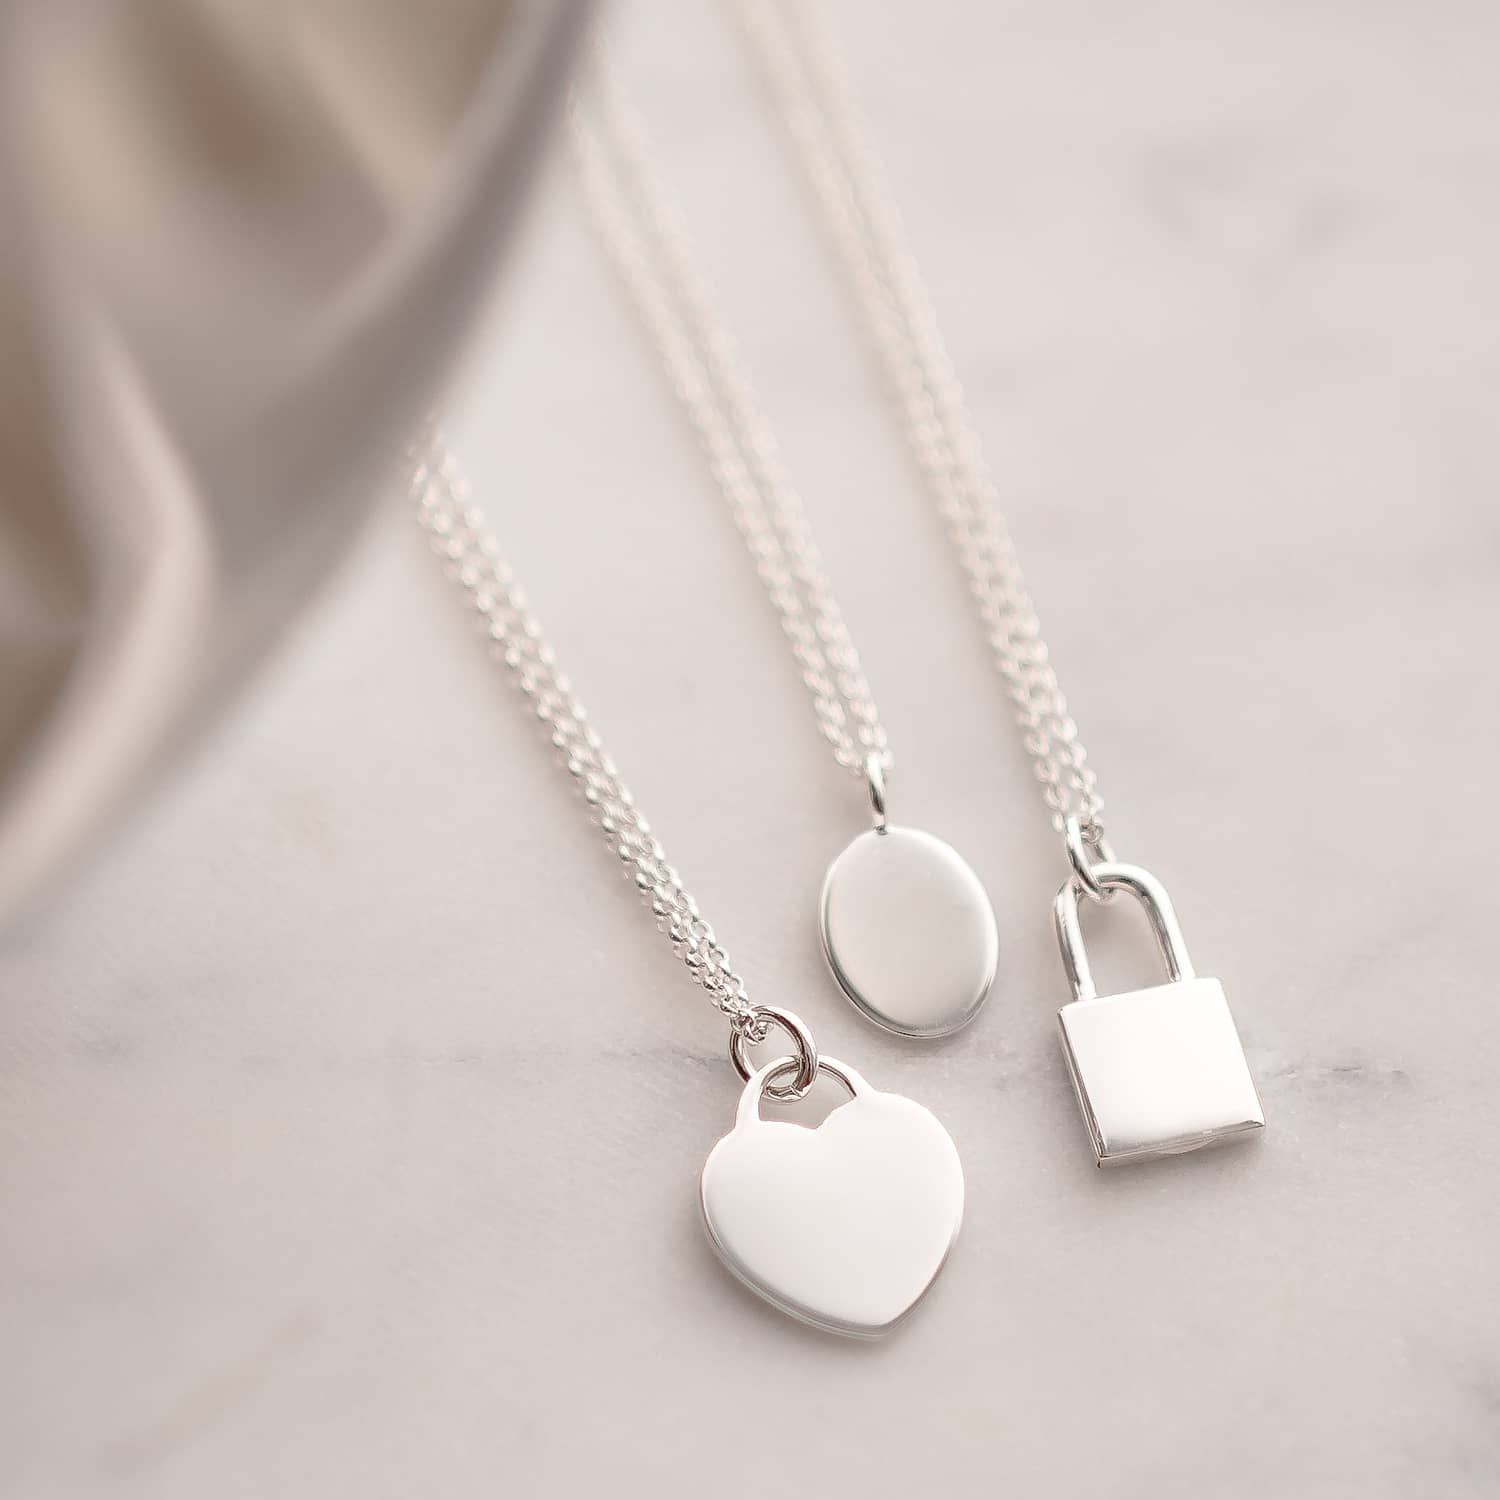 engraved sterling silver necklaces